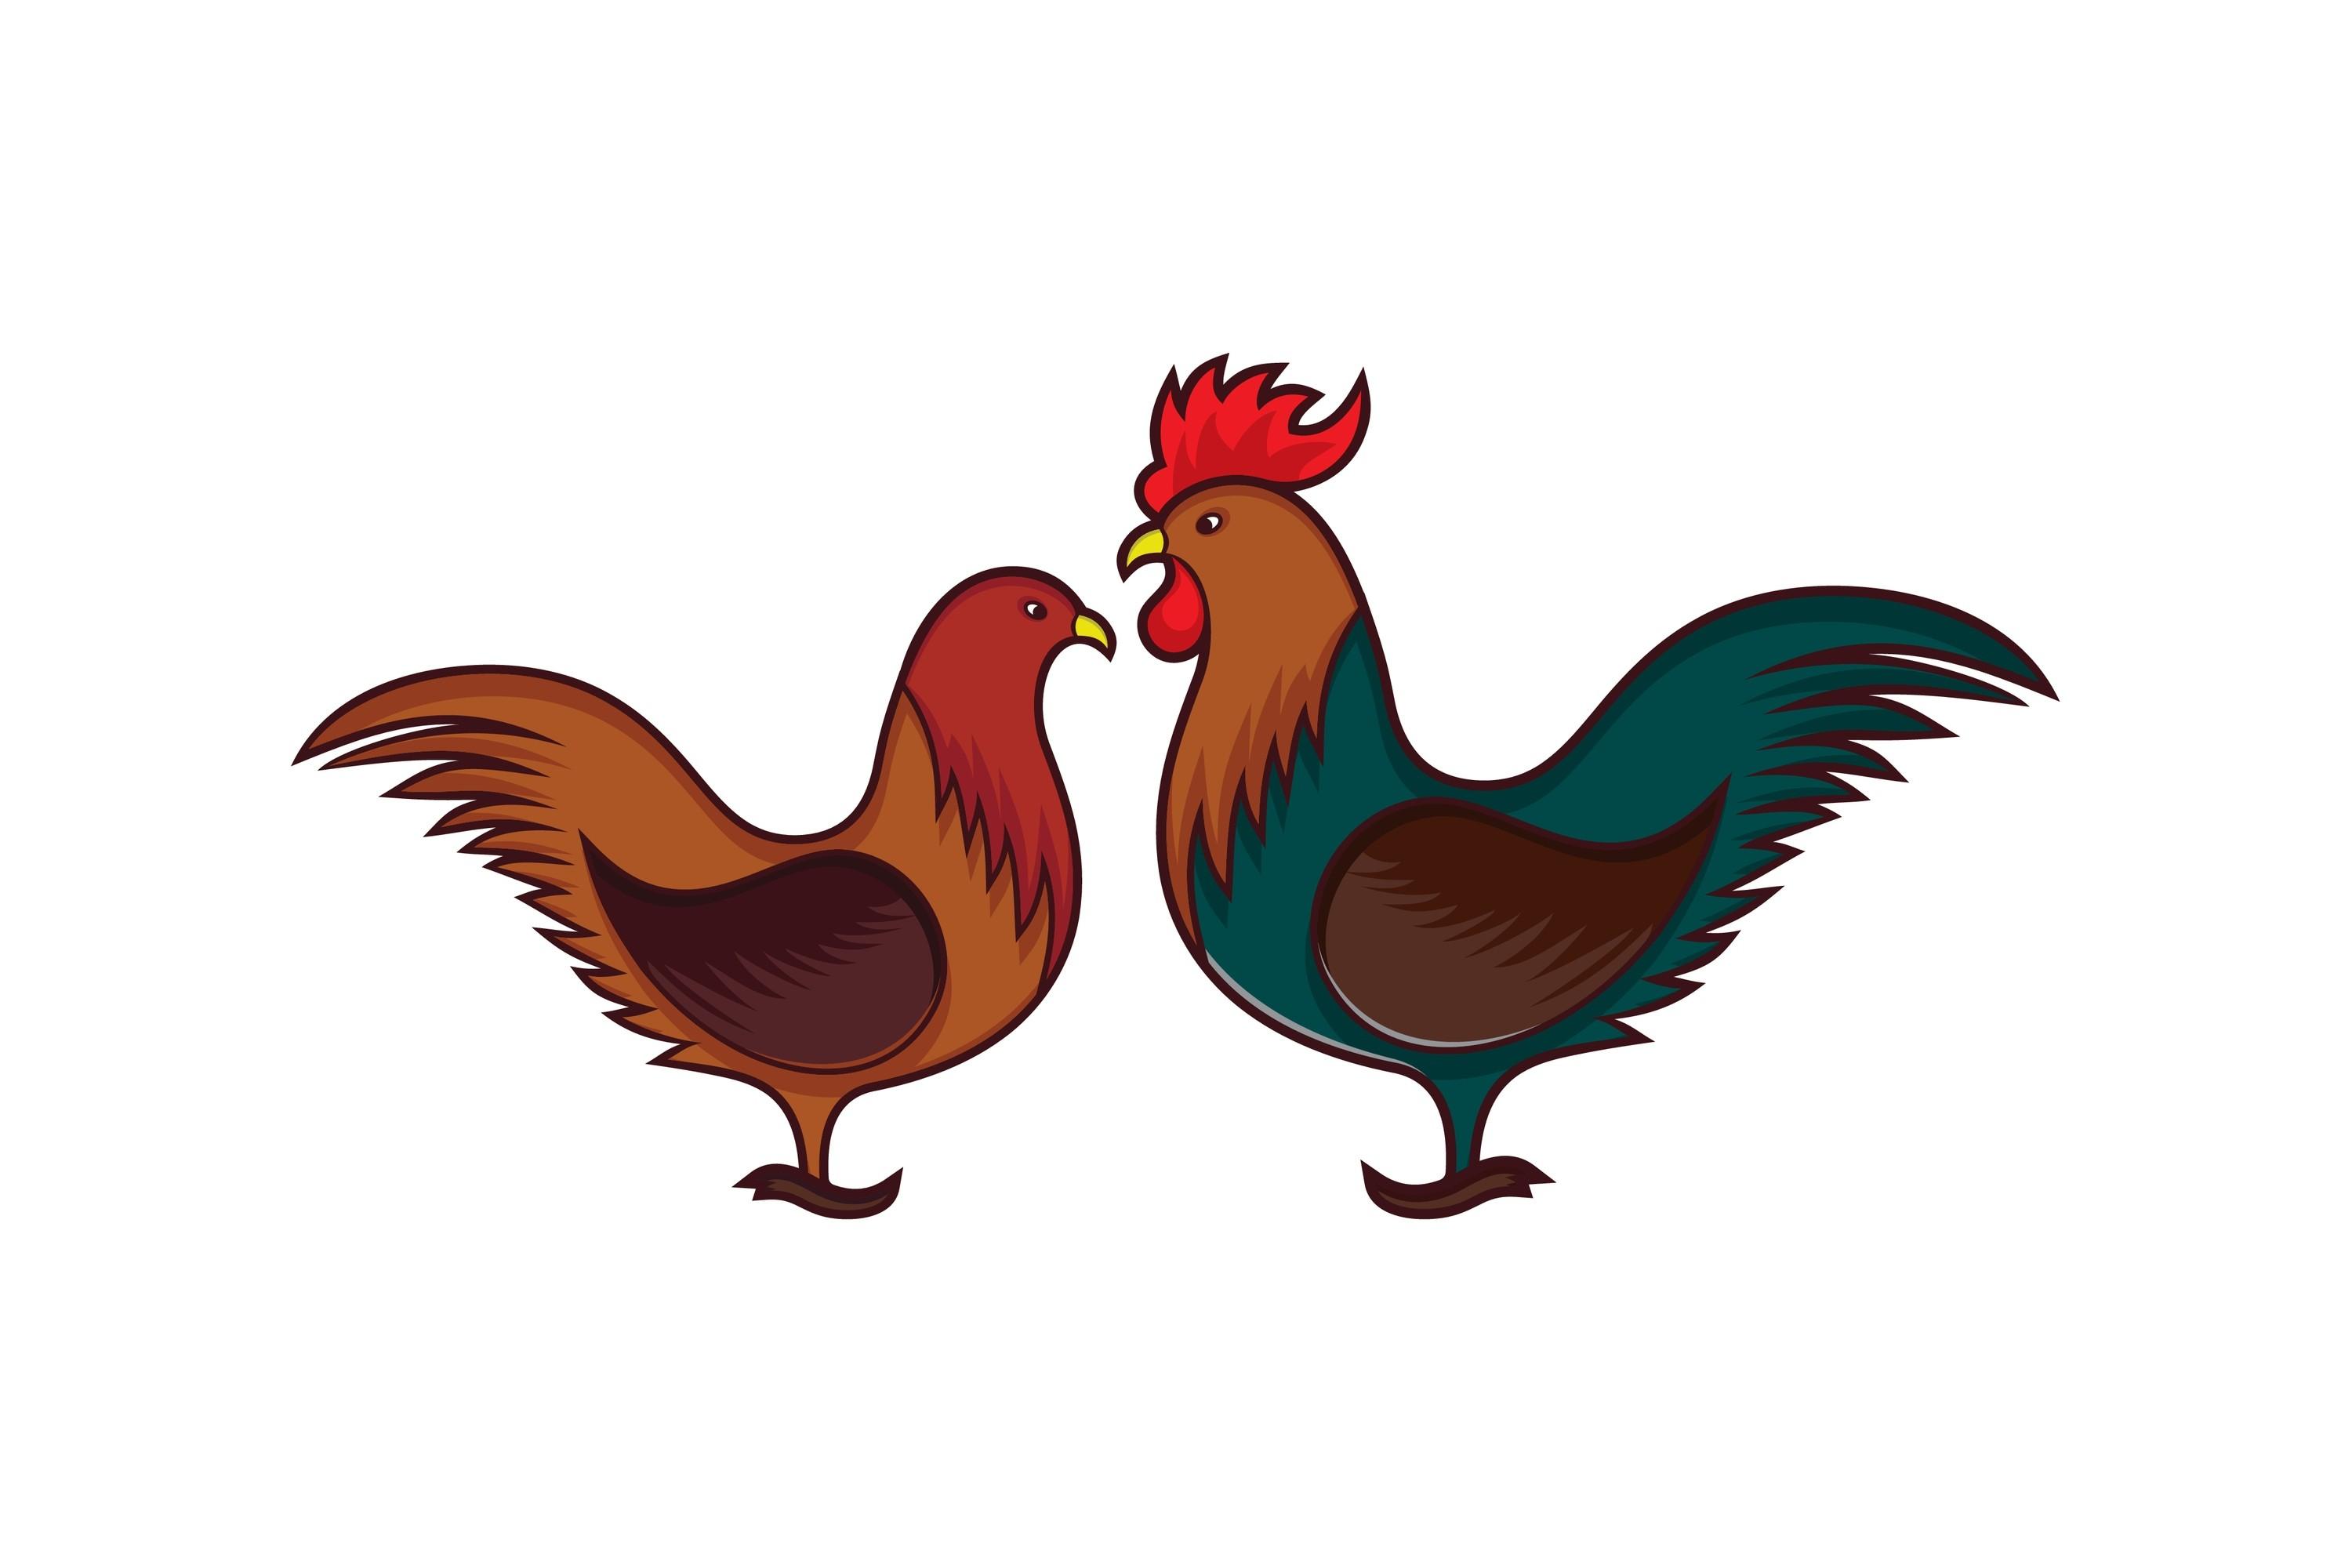 Chicken and Rooster Vector Illustration